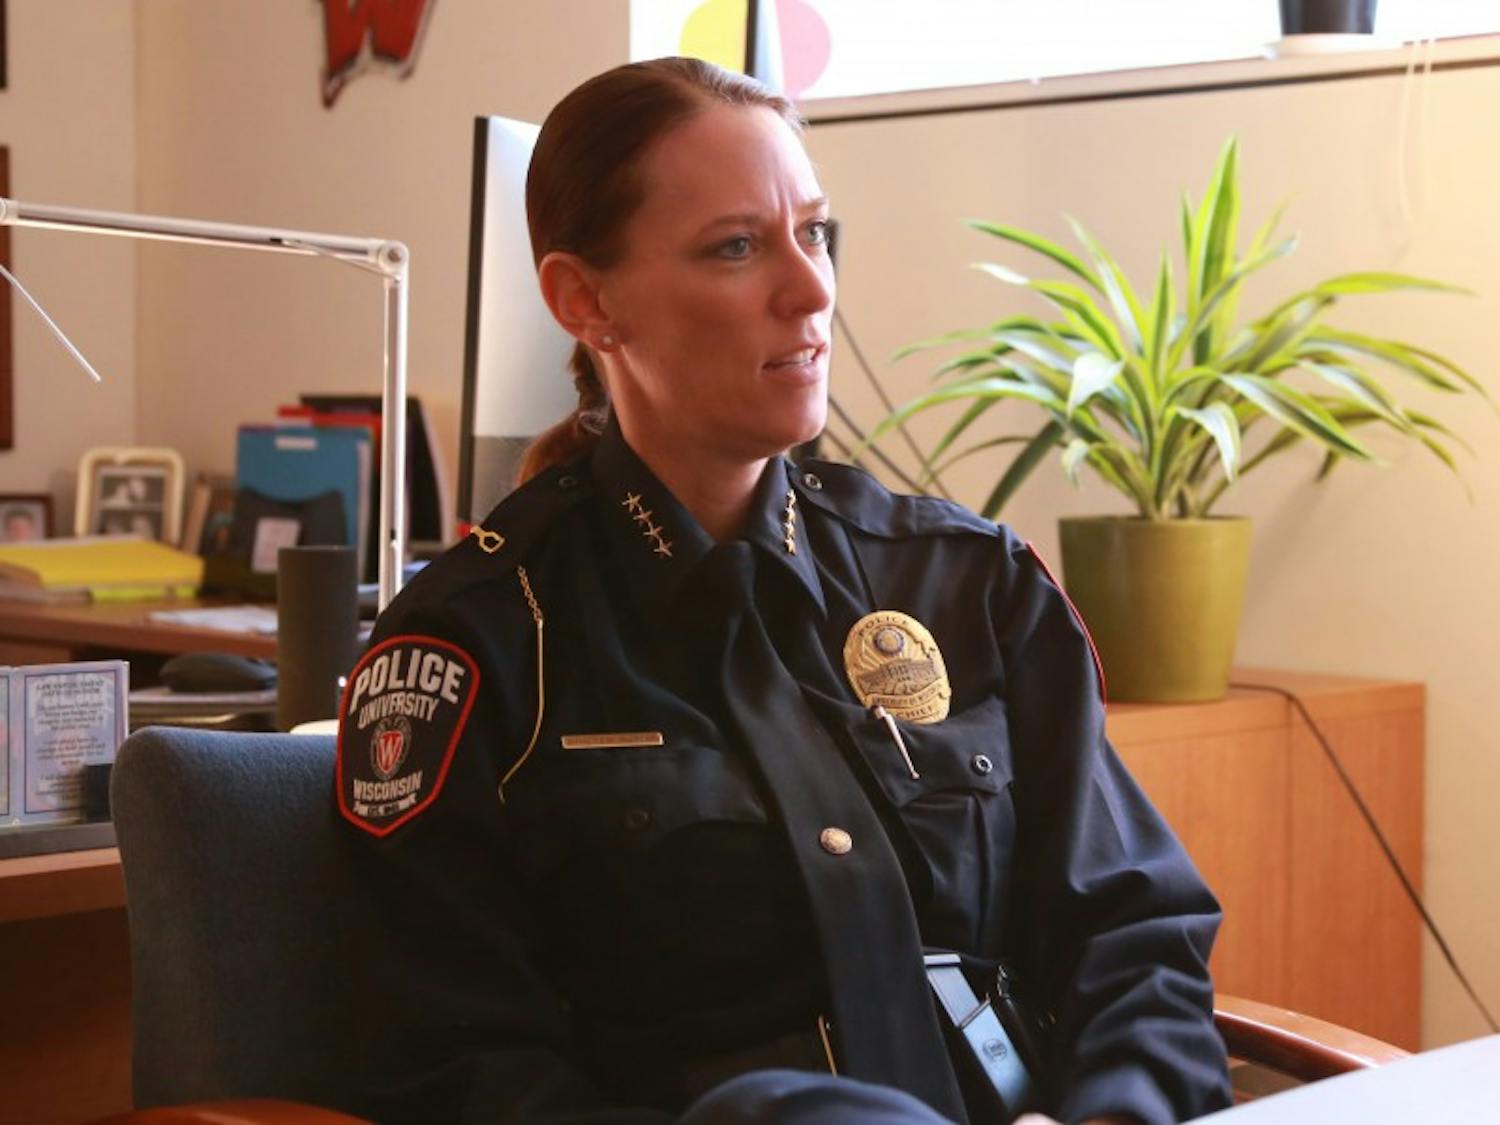 UWPD Chief Kristen Roman&nbsp;says she is improving relations and transparency between UWPD and the campus community.